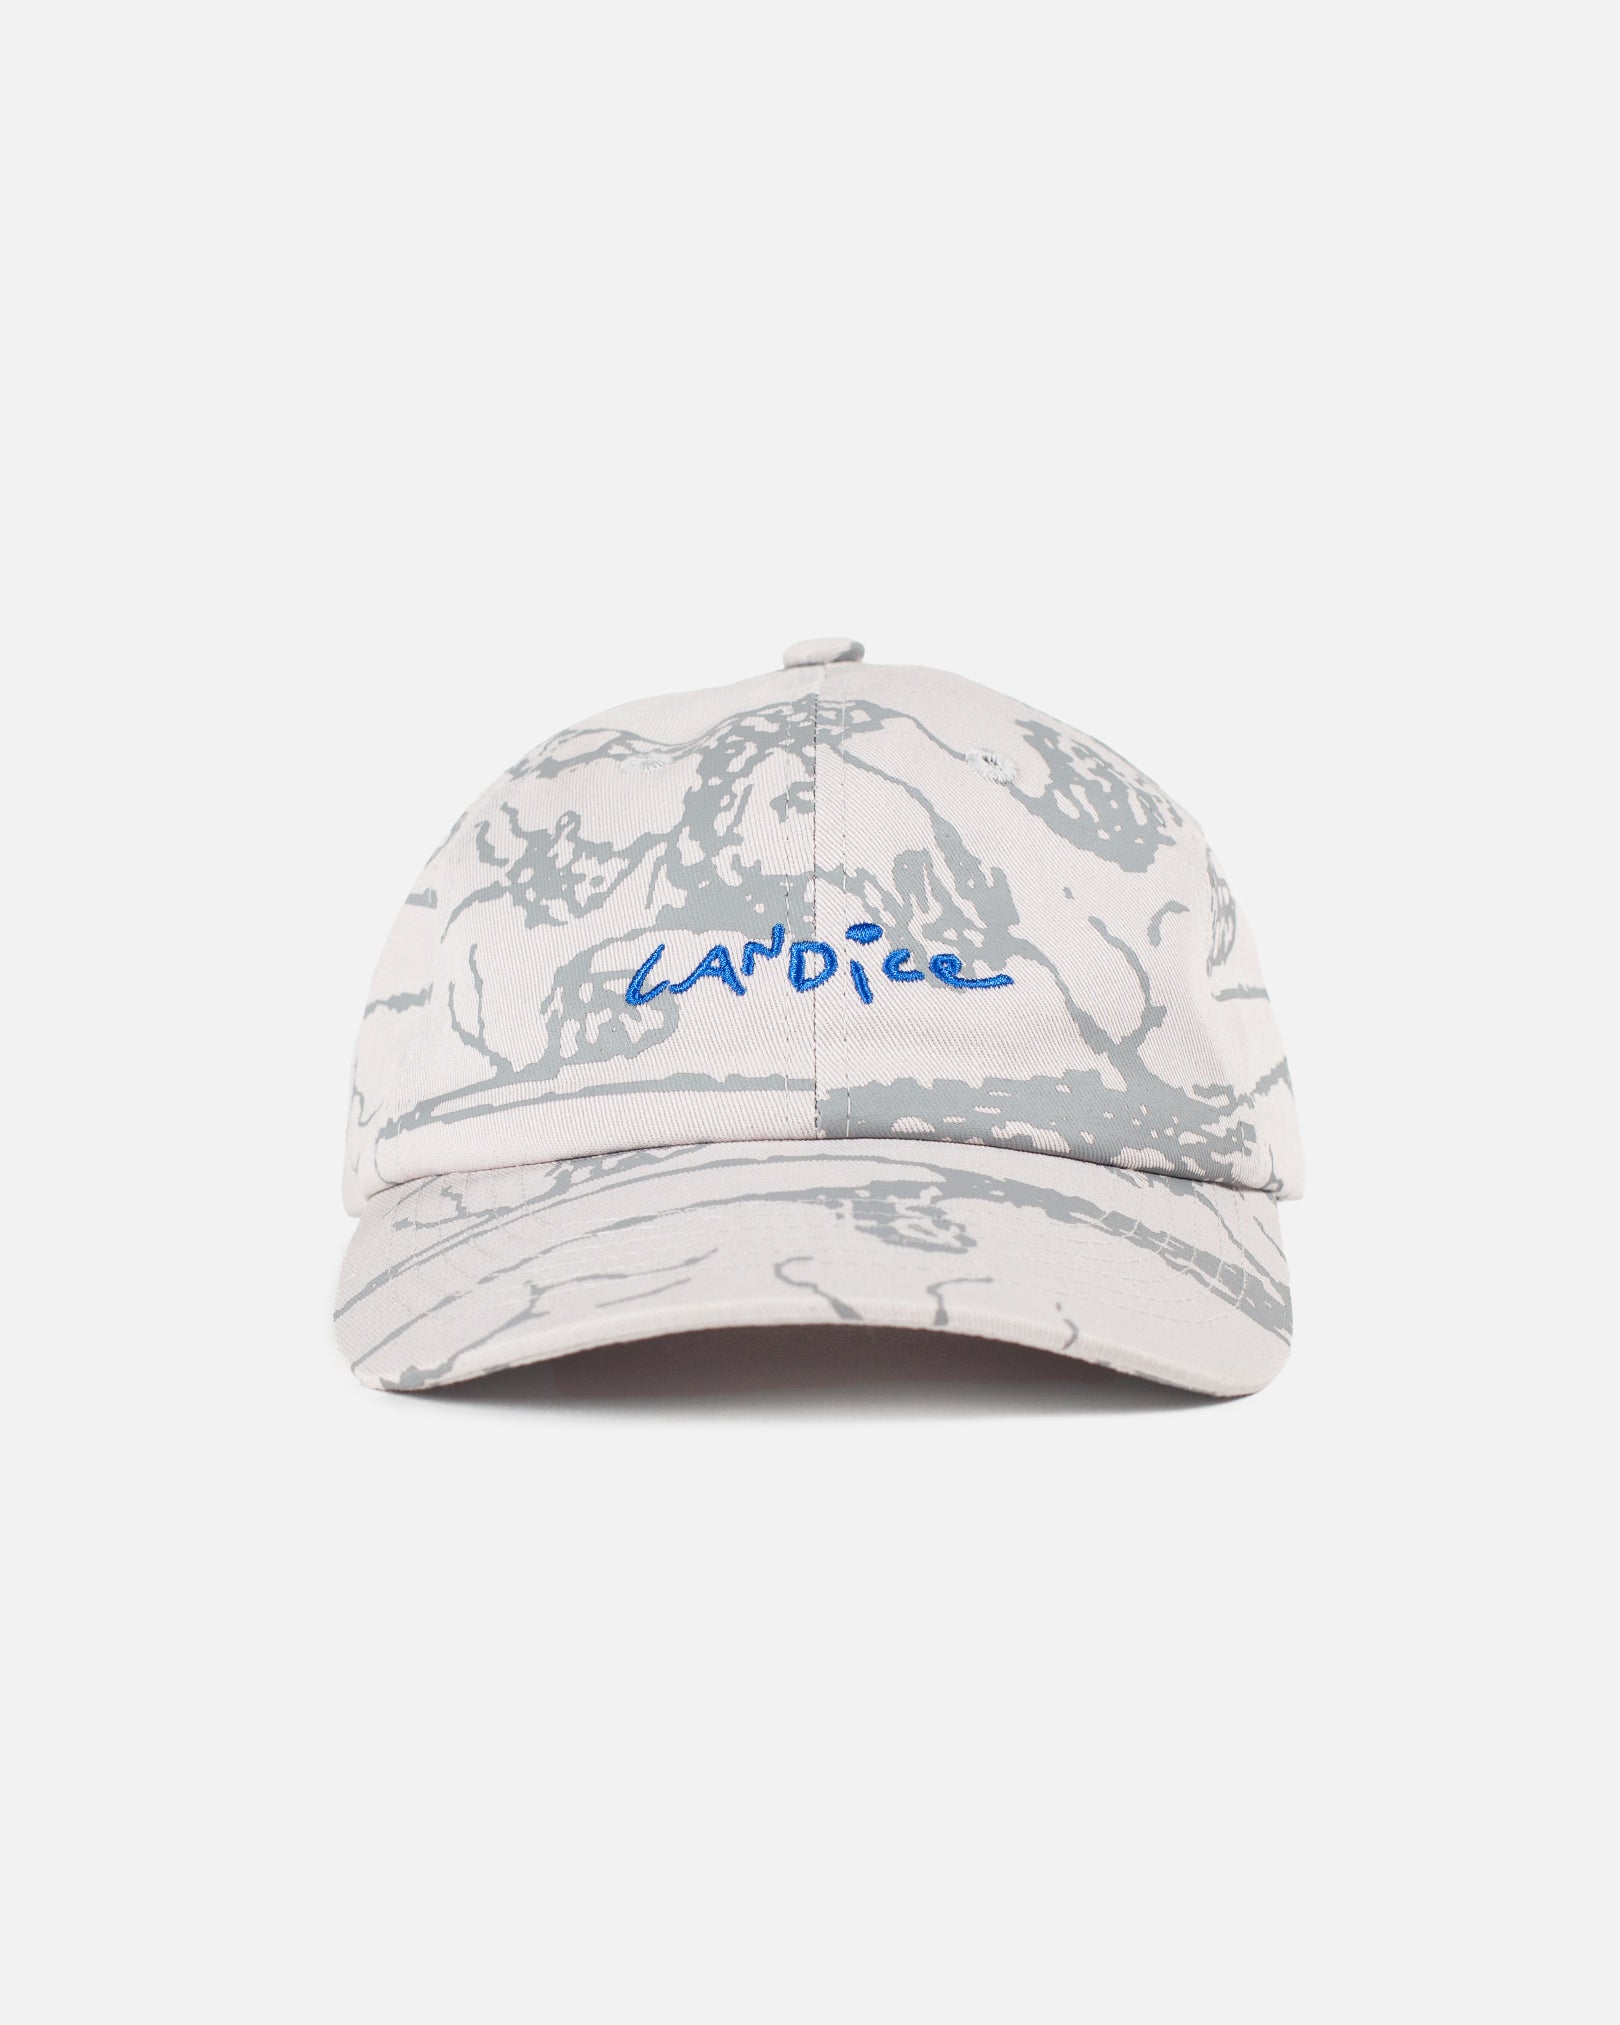 Candice-forager-printed-dad-hat